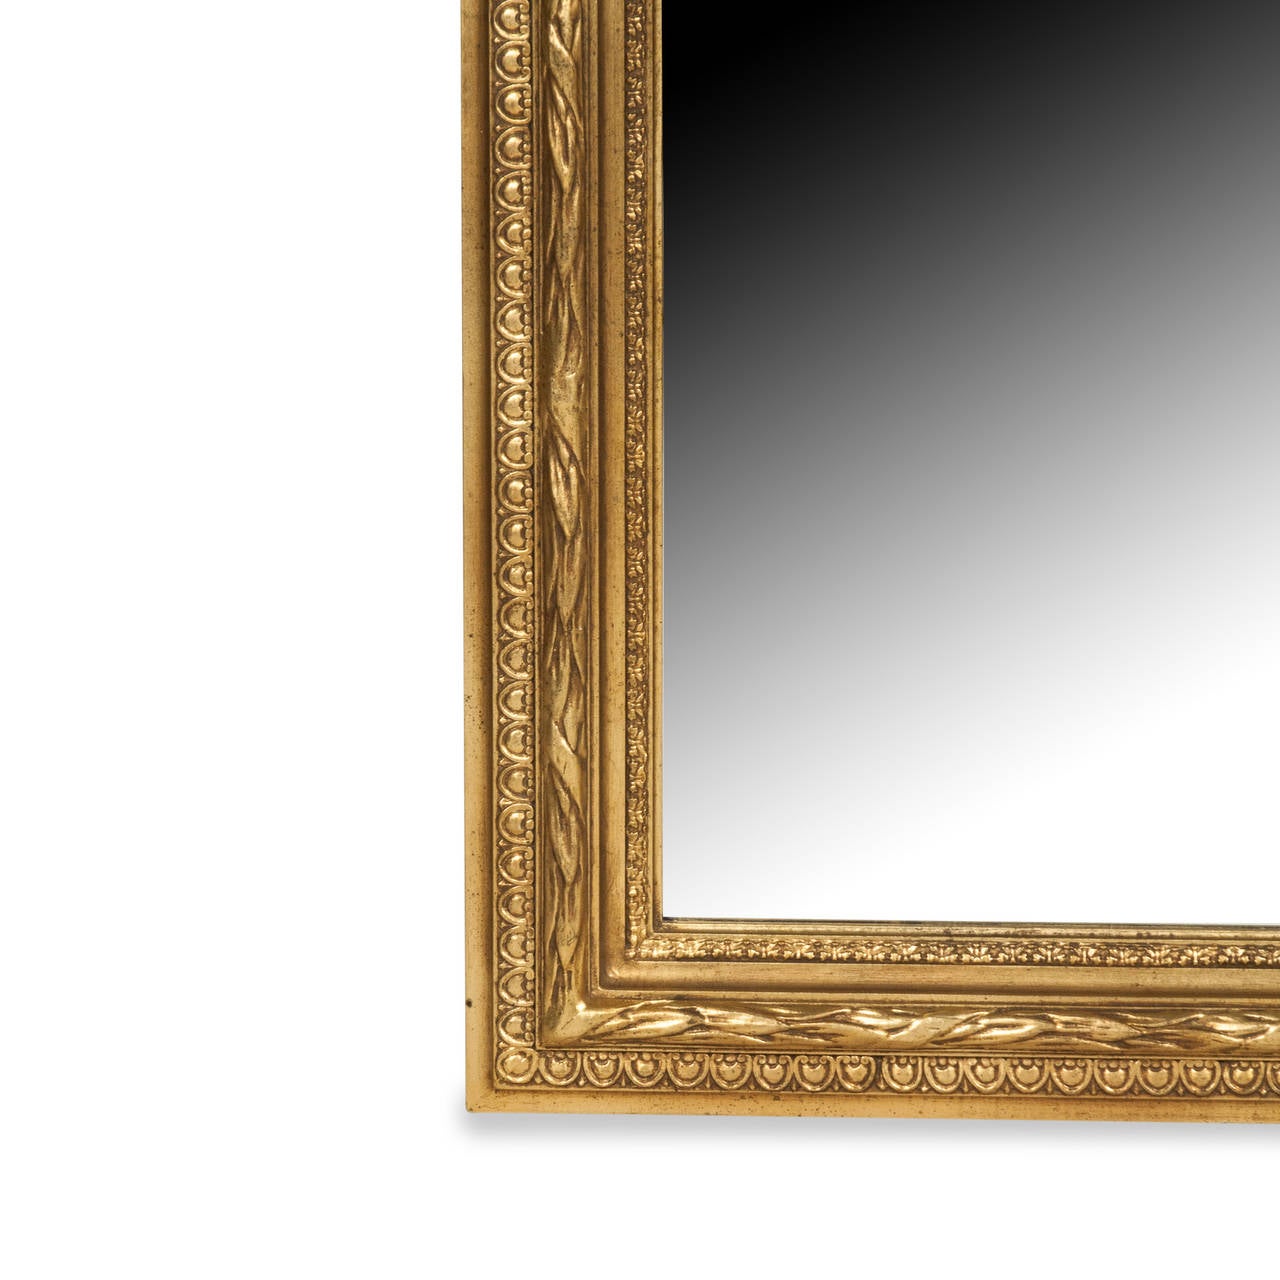 Carved gilt wood mirror, rectangular form, beveled mirror edge, American 1980s. Height 48 in, width 36 in, depth 1 1/2 in. (Item #2305)